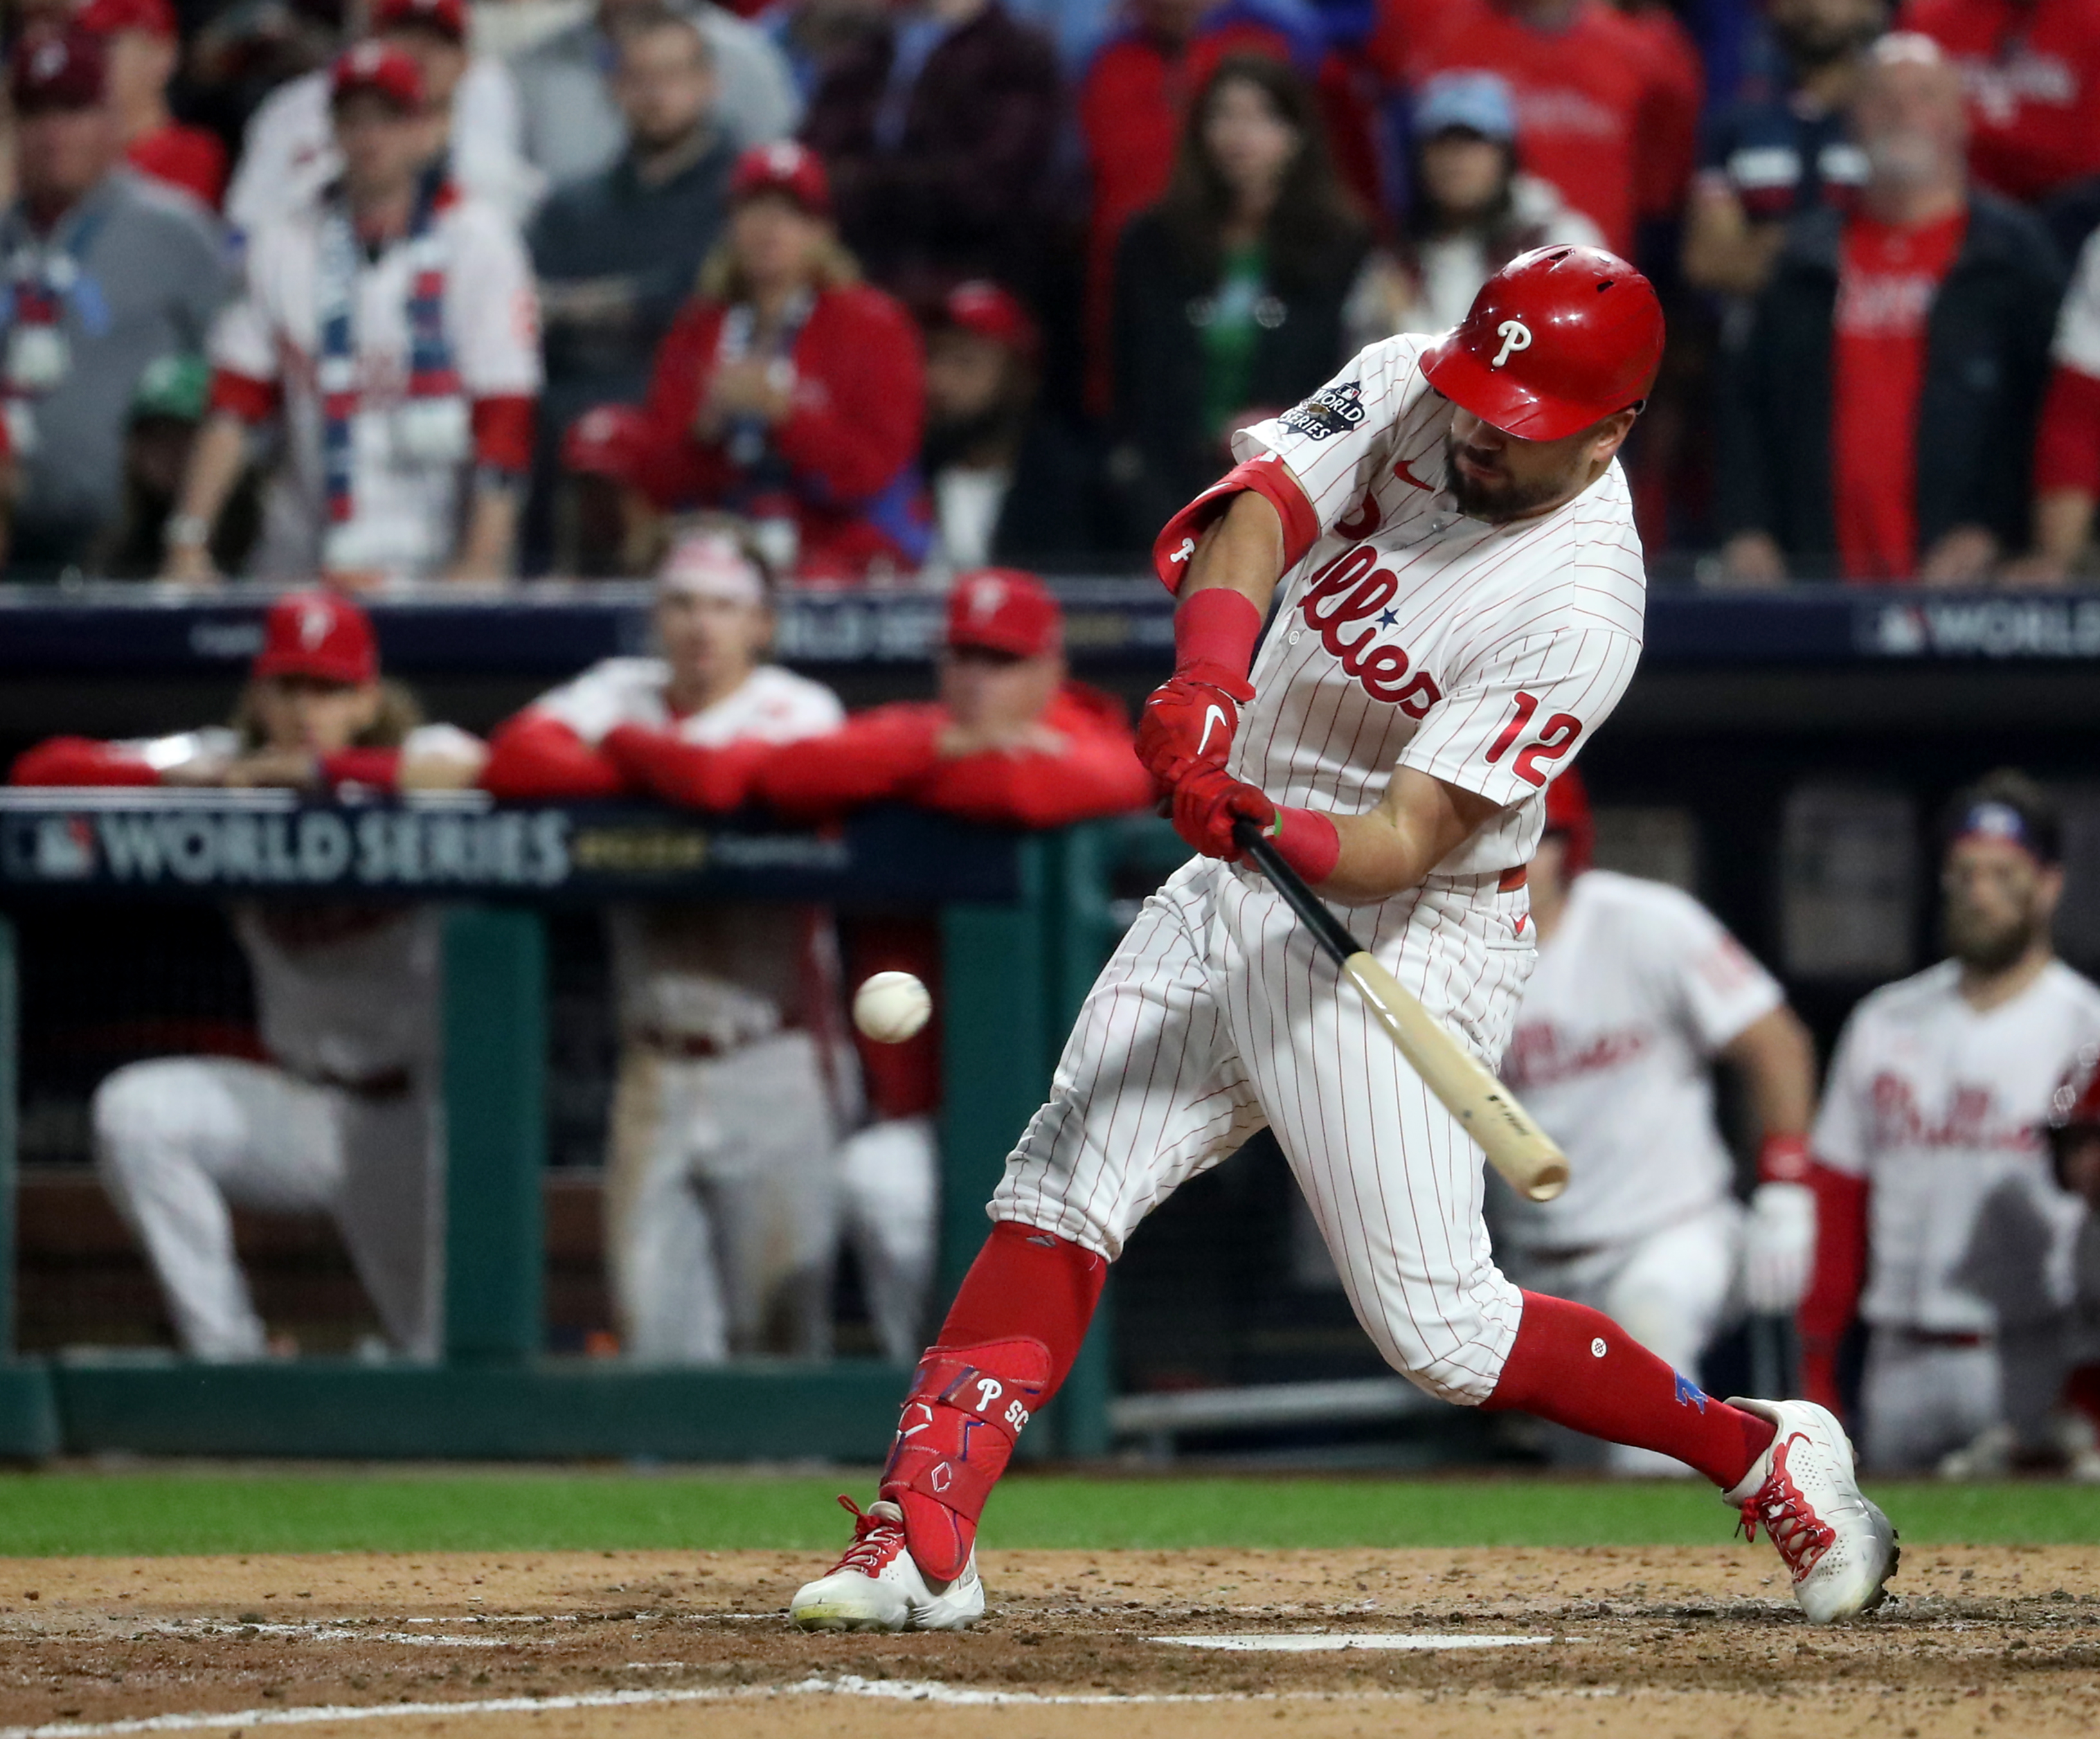 Kyle Schwarber (12) of the Philadelphia Phillies hits a 2-run home run in the fifth inning to give the Phillies a 6-0 lead during World Series Game 3 against the Houston Astros at Citizens Bank Park, Tuesday, Nov. 1, 2022.